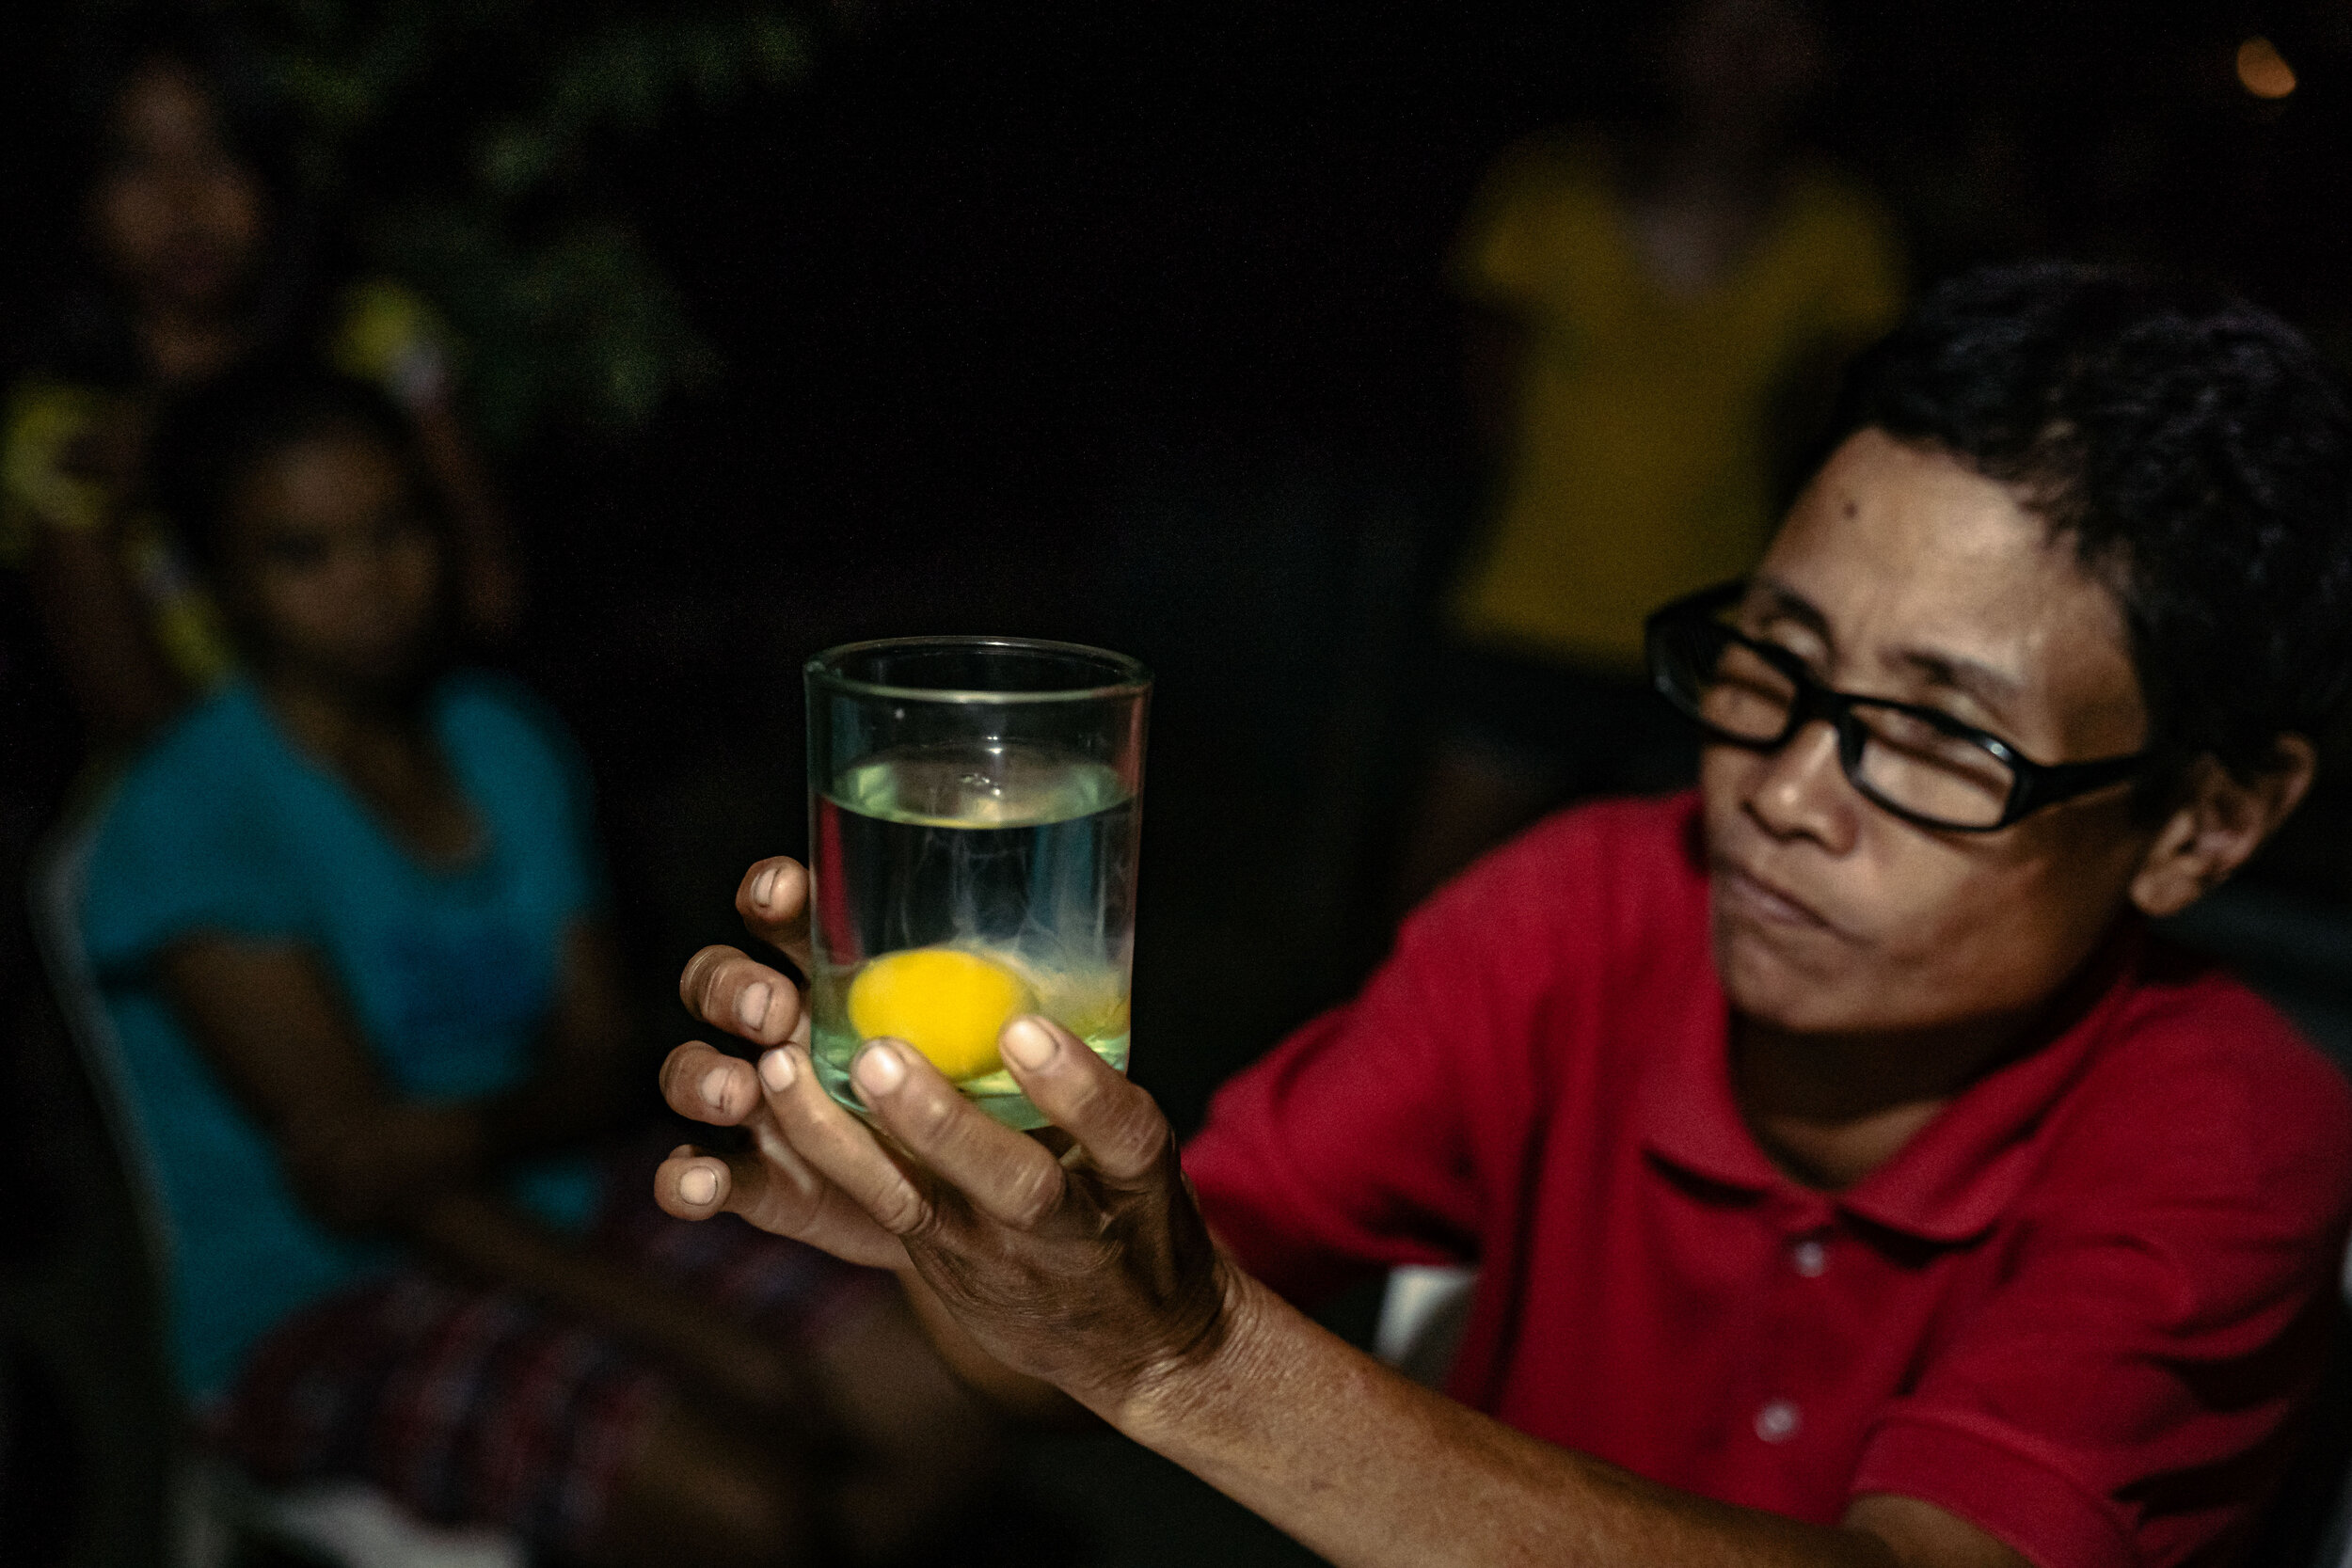  Nida Cautidar, a local healer from Sitio Kalangitan, performs a diagnostic ritual by cracking a raw egg into a glass of water to be examined for any change in shape that might suggest the nature of one’s illness. Nida learned these healing practices